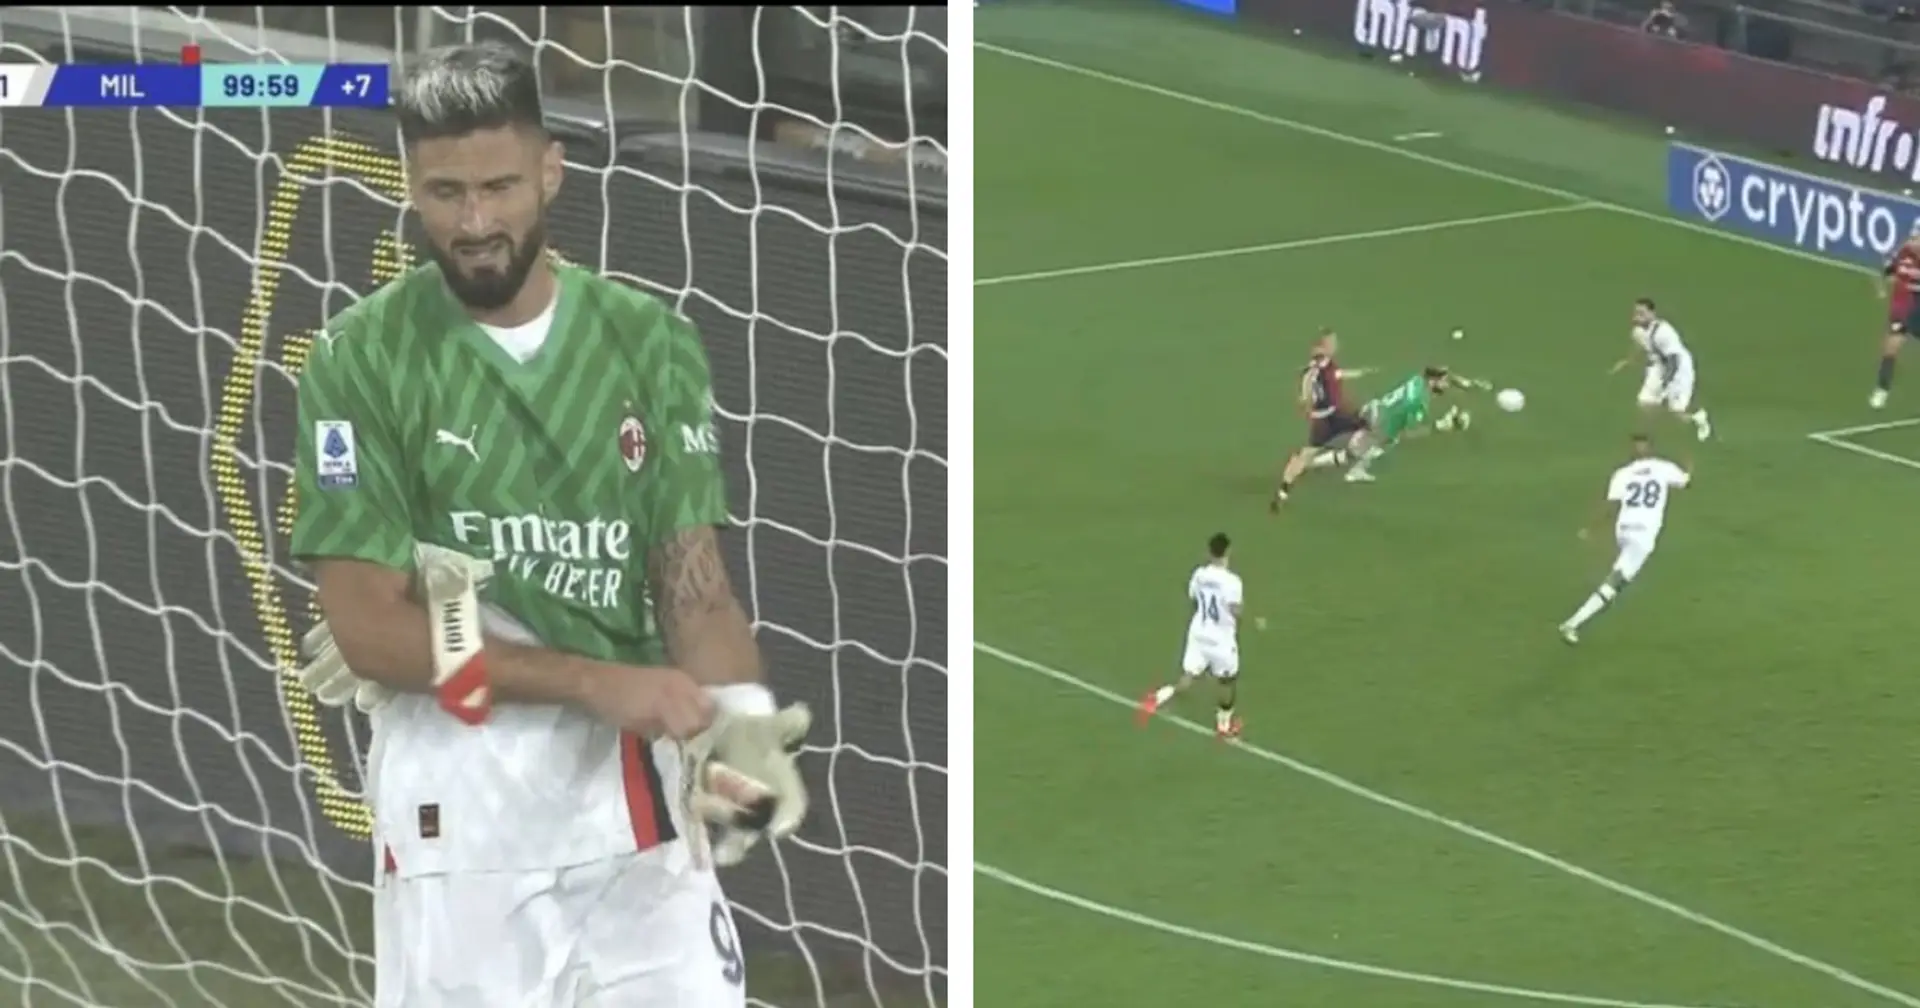 Olivier Giroud goes in goal for AC Milan, makes brave save to preserve three points